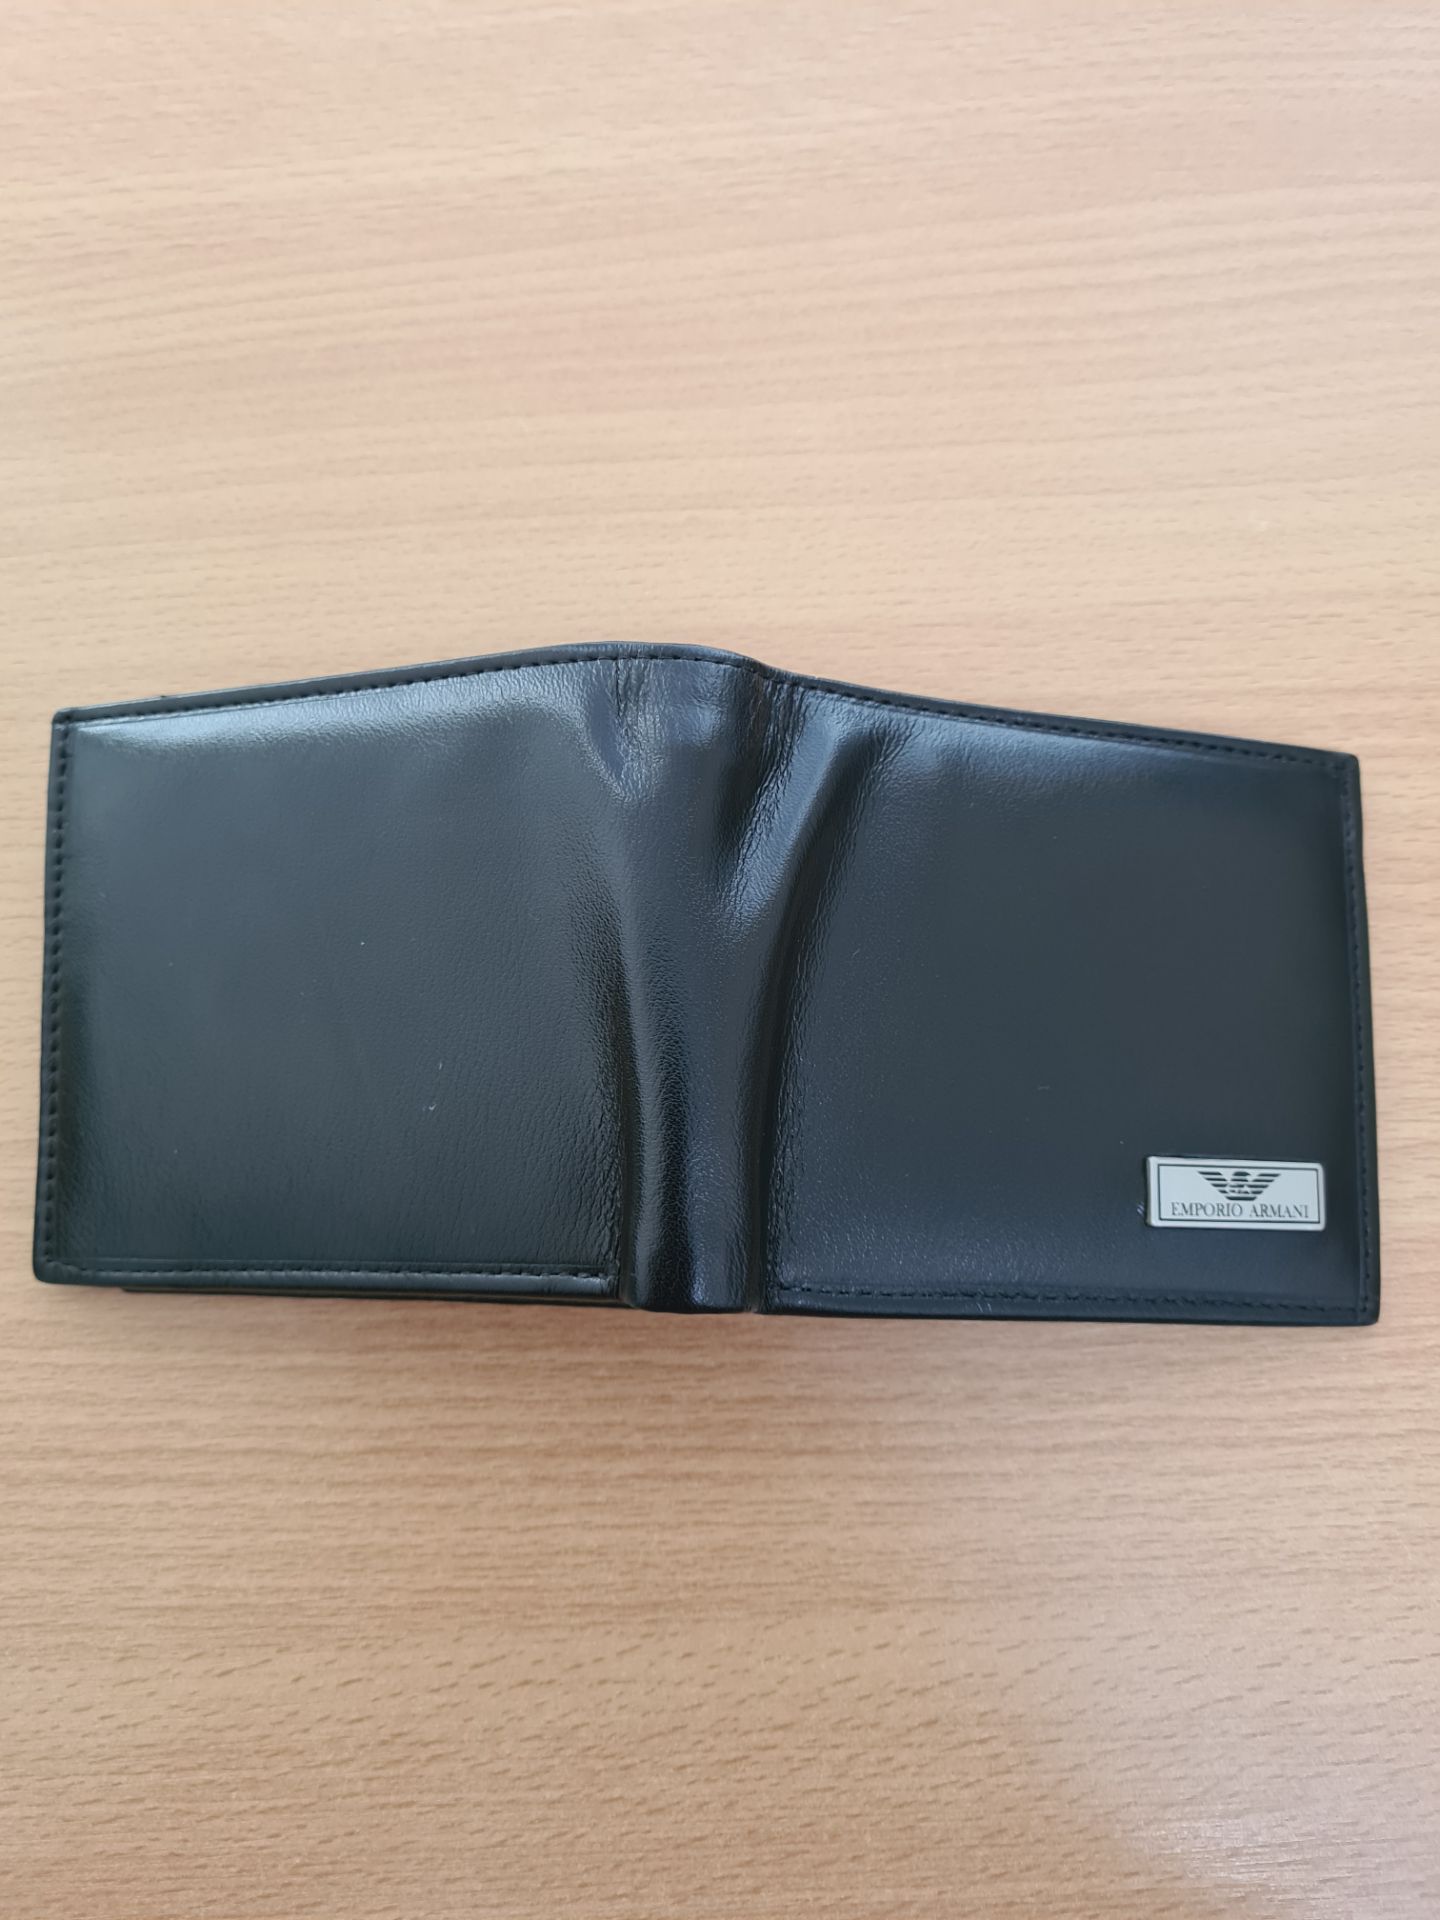 Emporio Armani Men's Leather Wallet - New With Box - Image 3 of 8